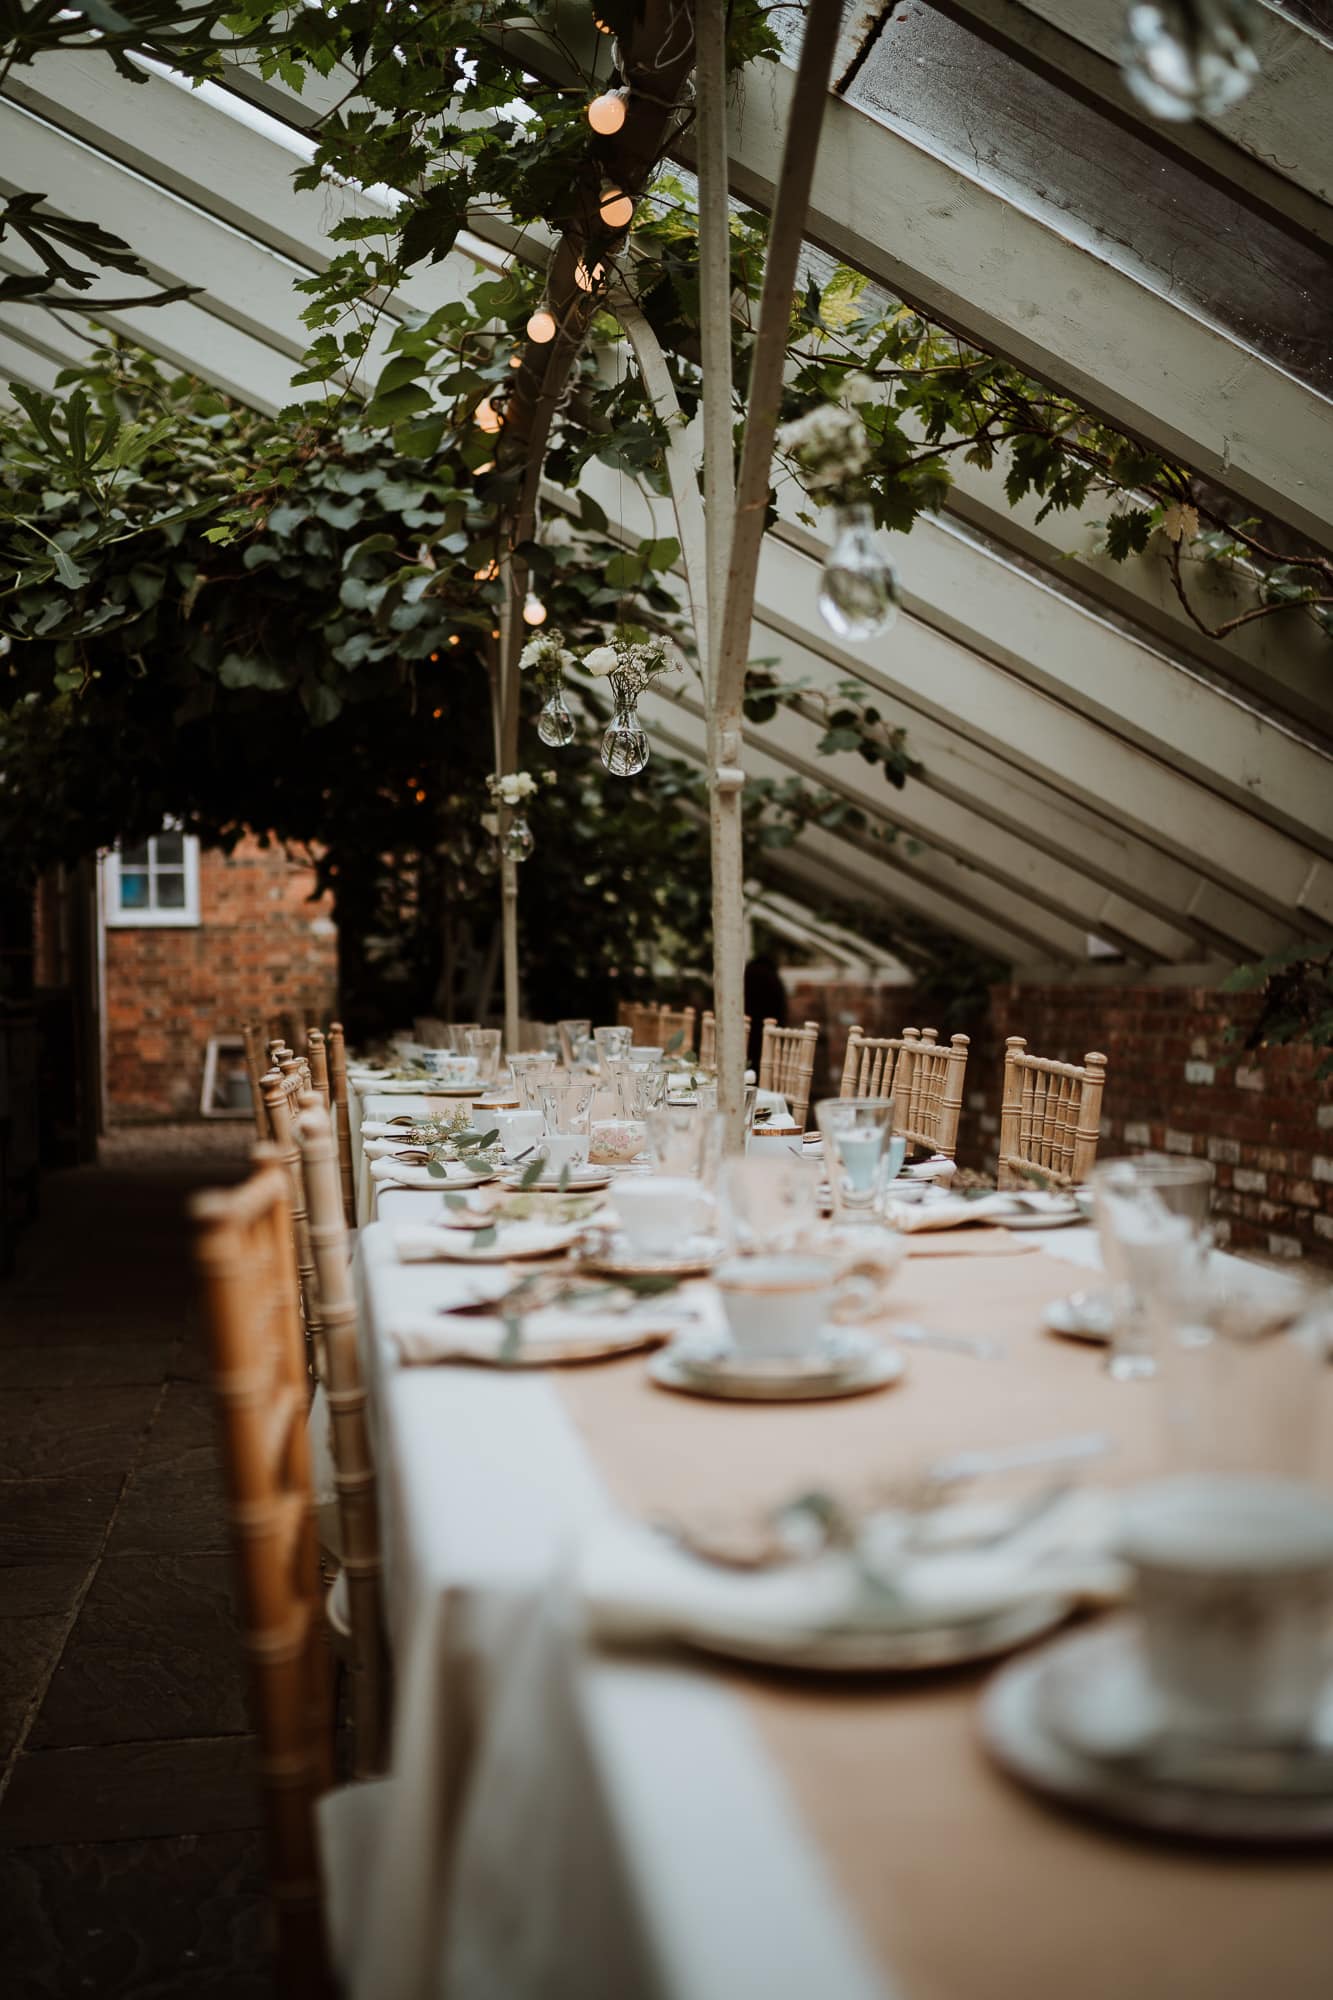 The Glasshouse in The Secret Garden dressed for an intimate afternoon tea wedding breakfast